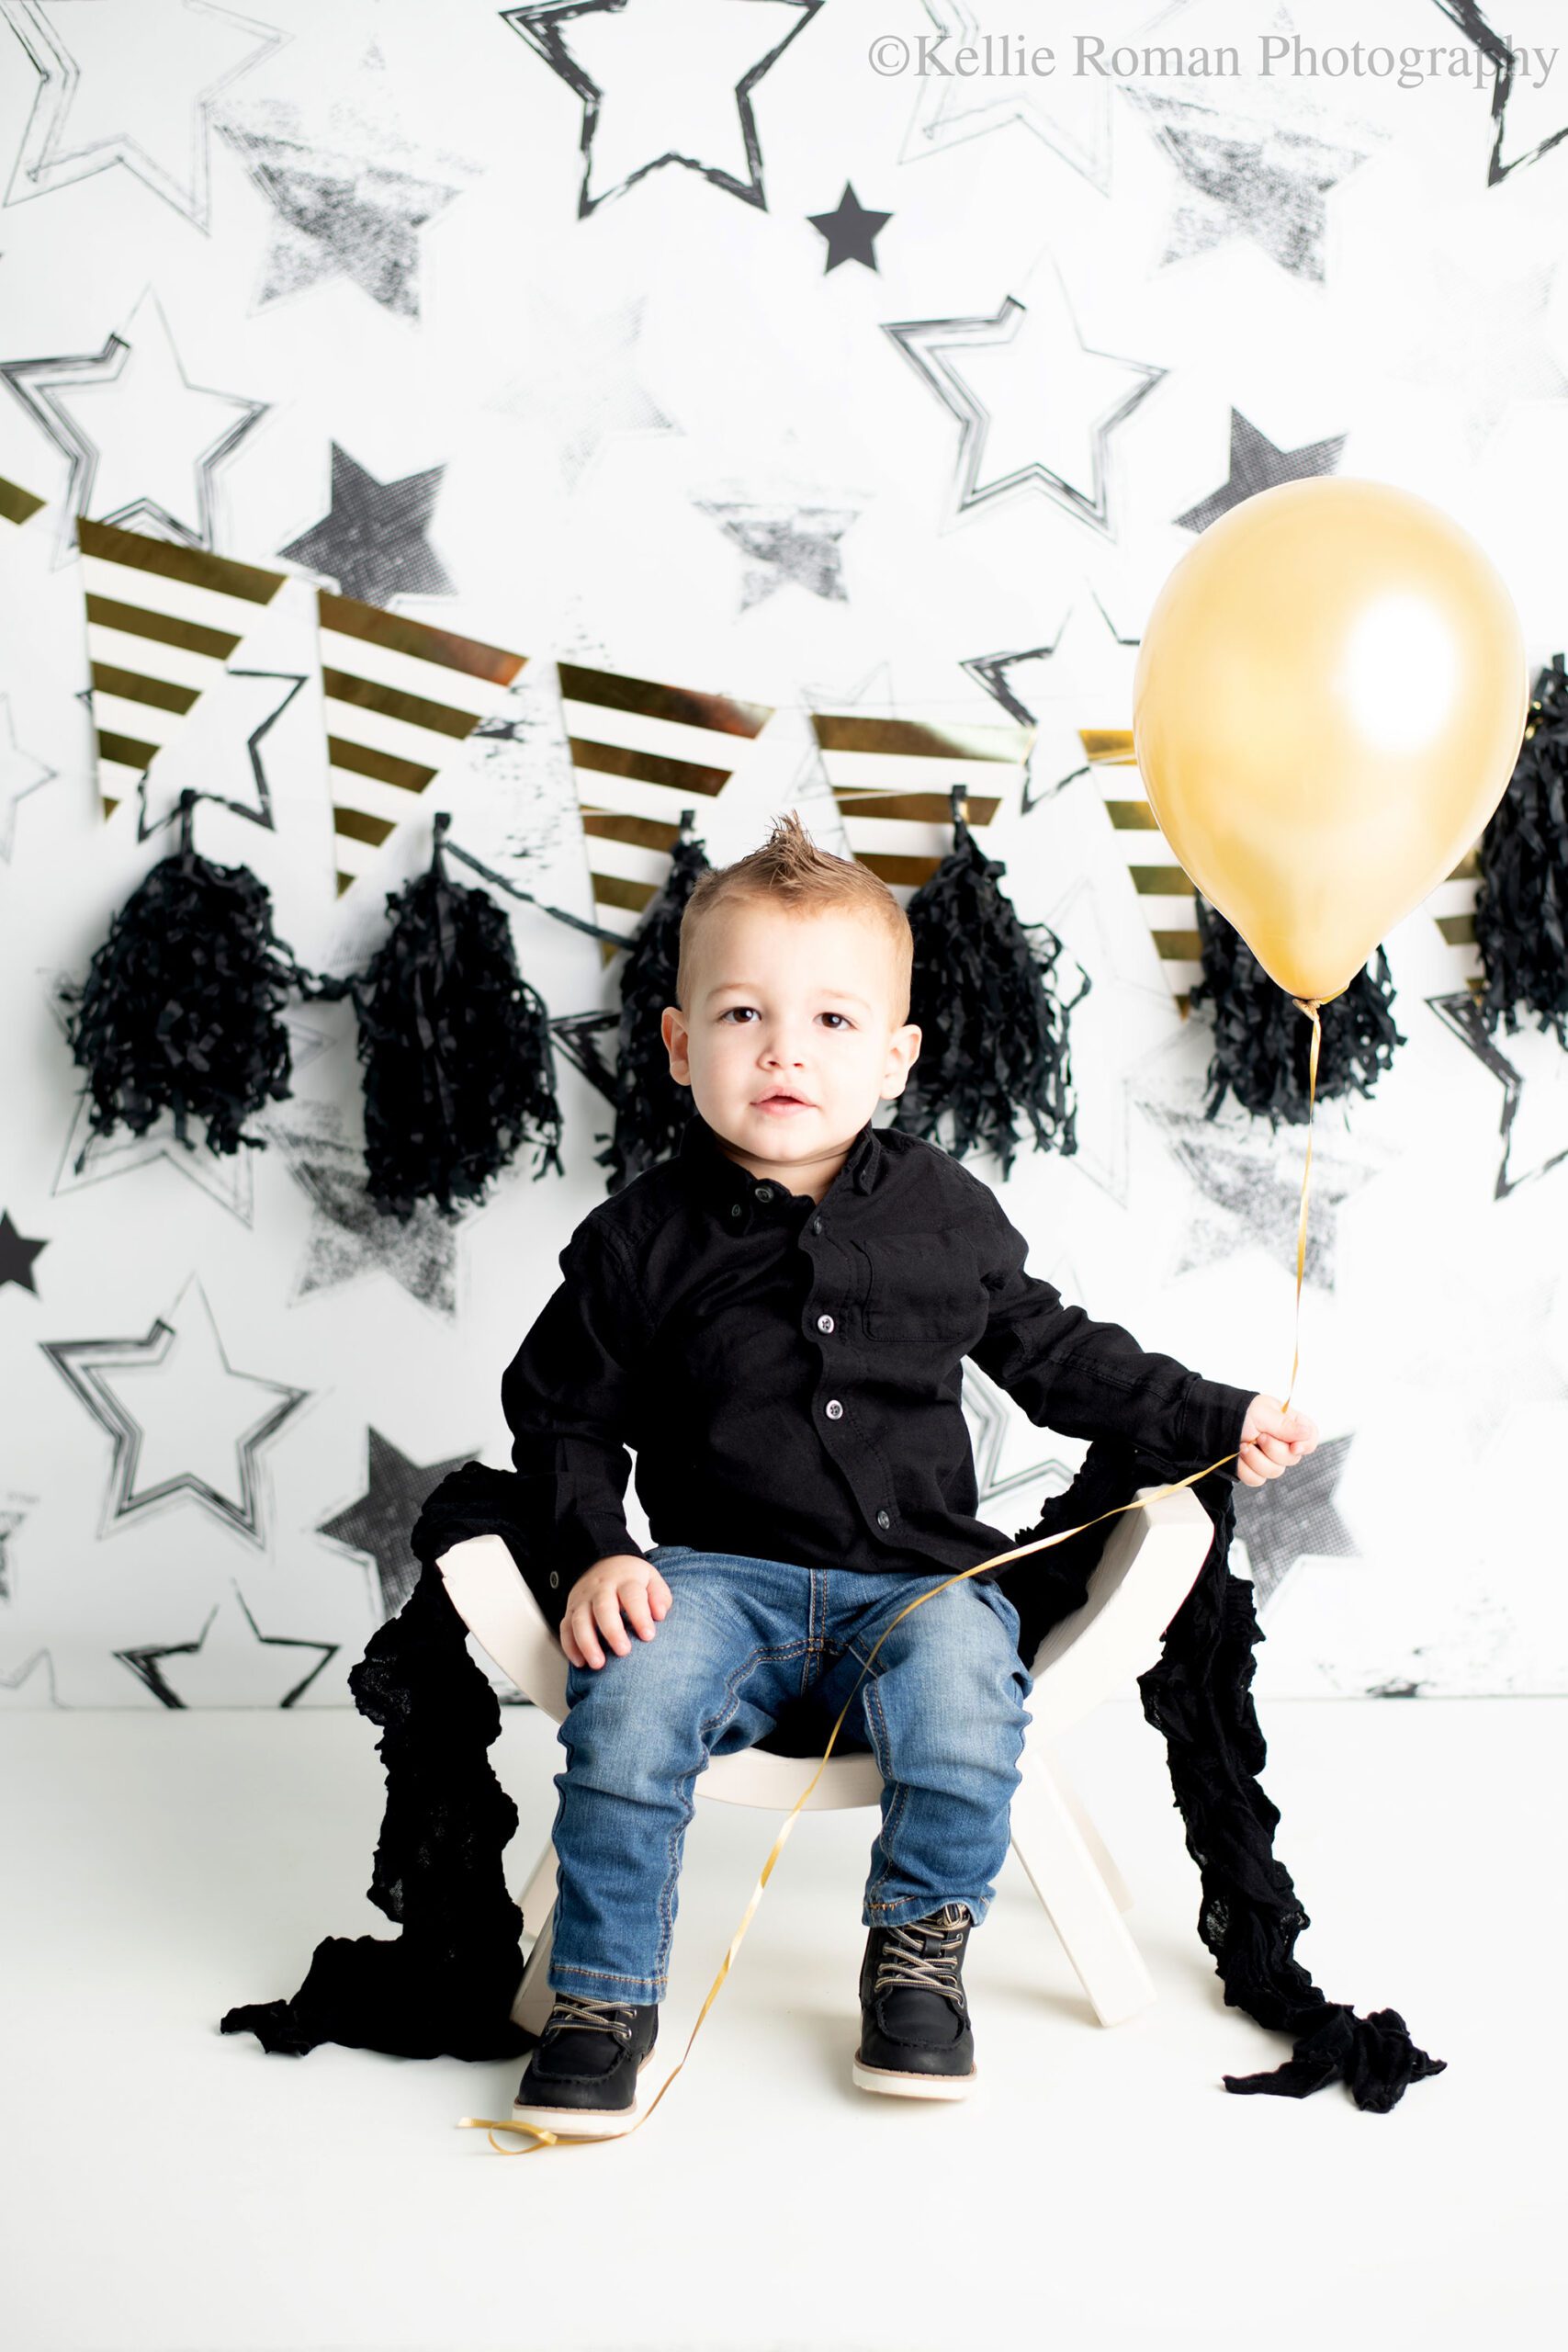 milwaukee child photographer. two year old boy in a black shirt with jeans is sitting on white curved bench. he's holding a gold balloon, and looking at the camera. the backdrop is white with black stars, black garland, and gold and white banner. 